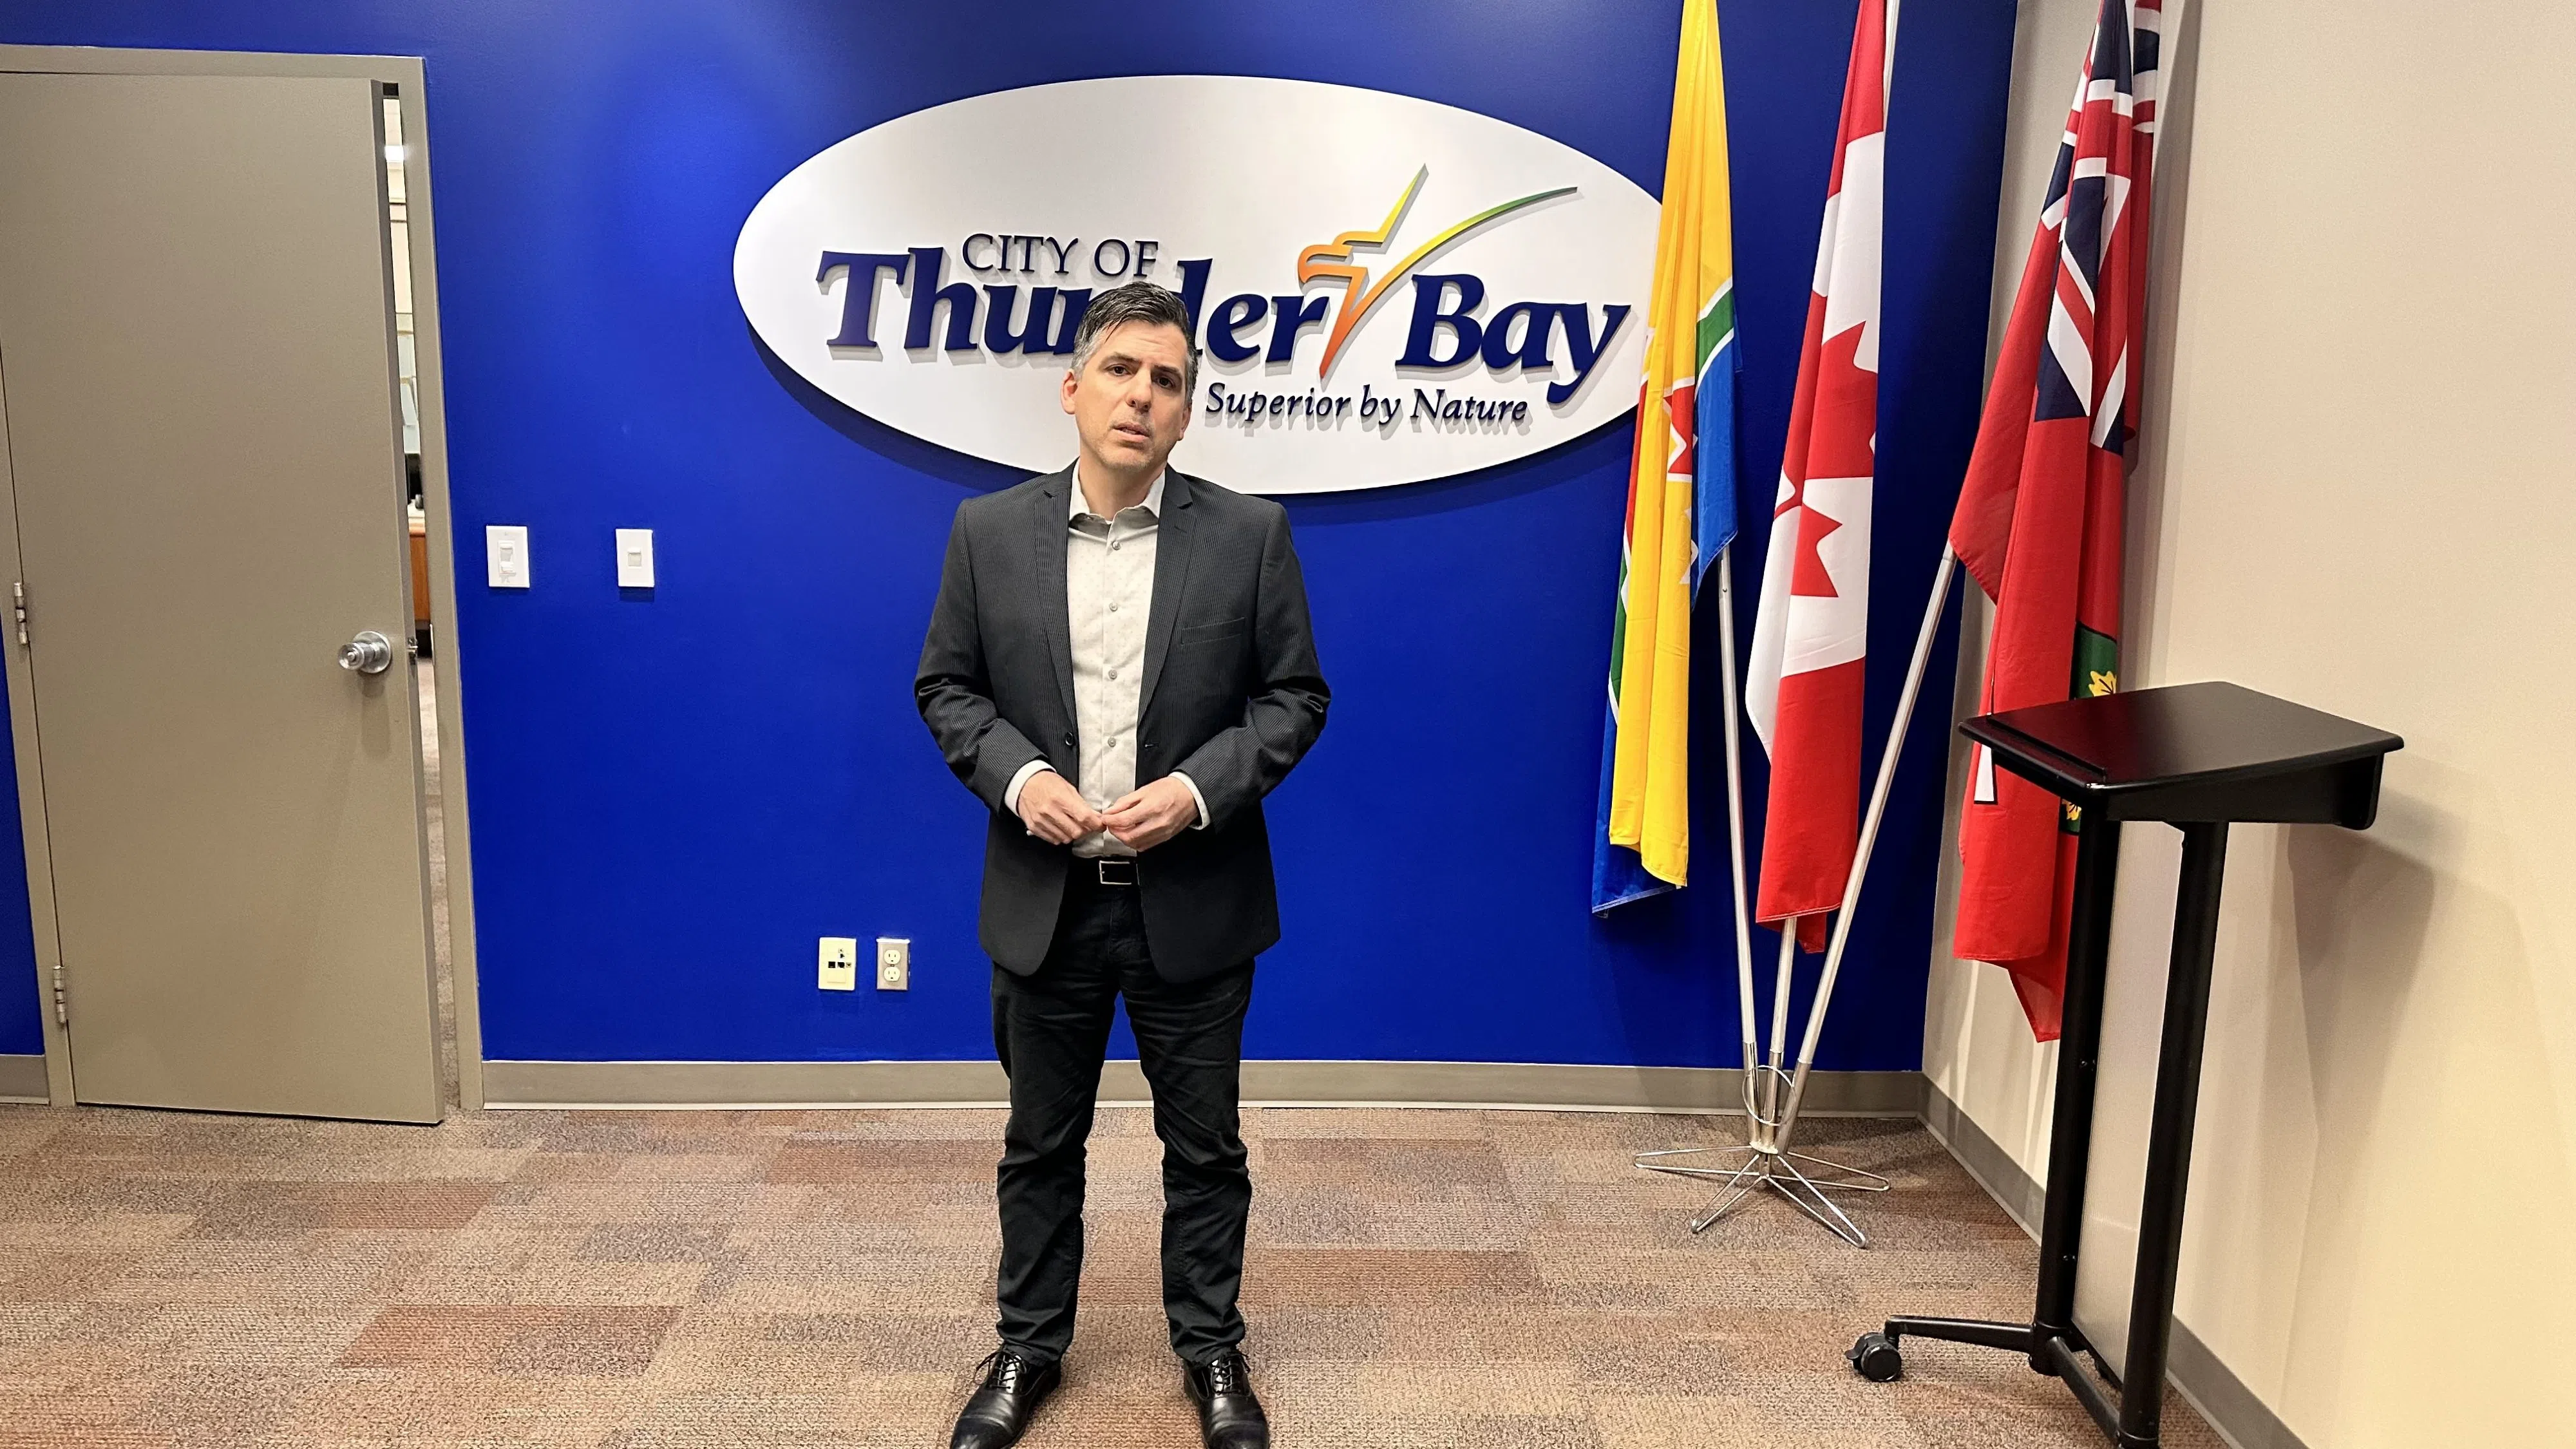 New recycling system coming to Thunder Bay